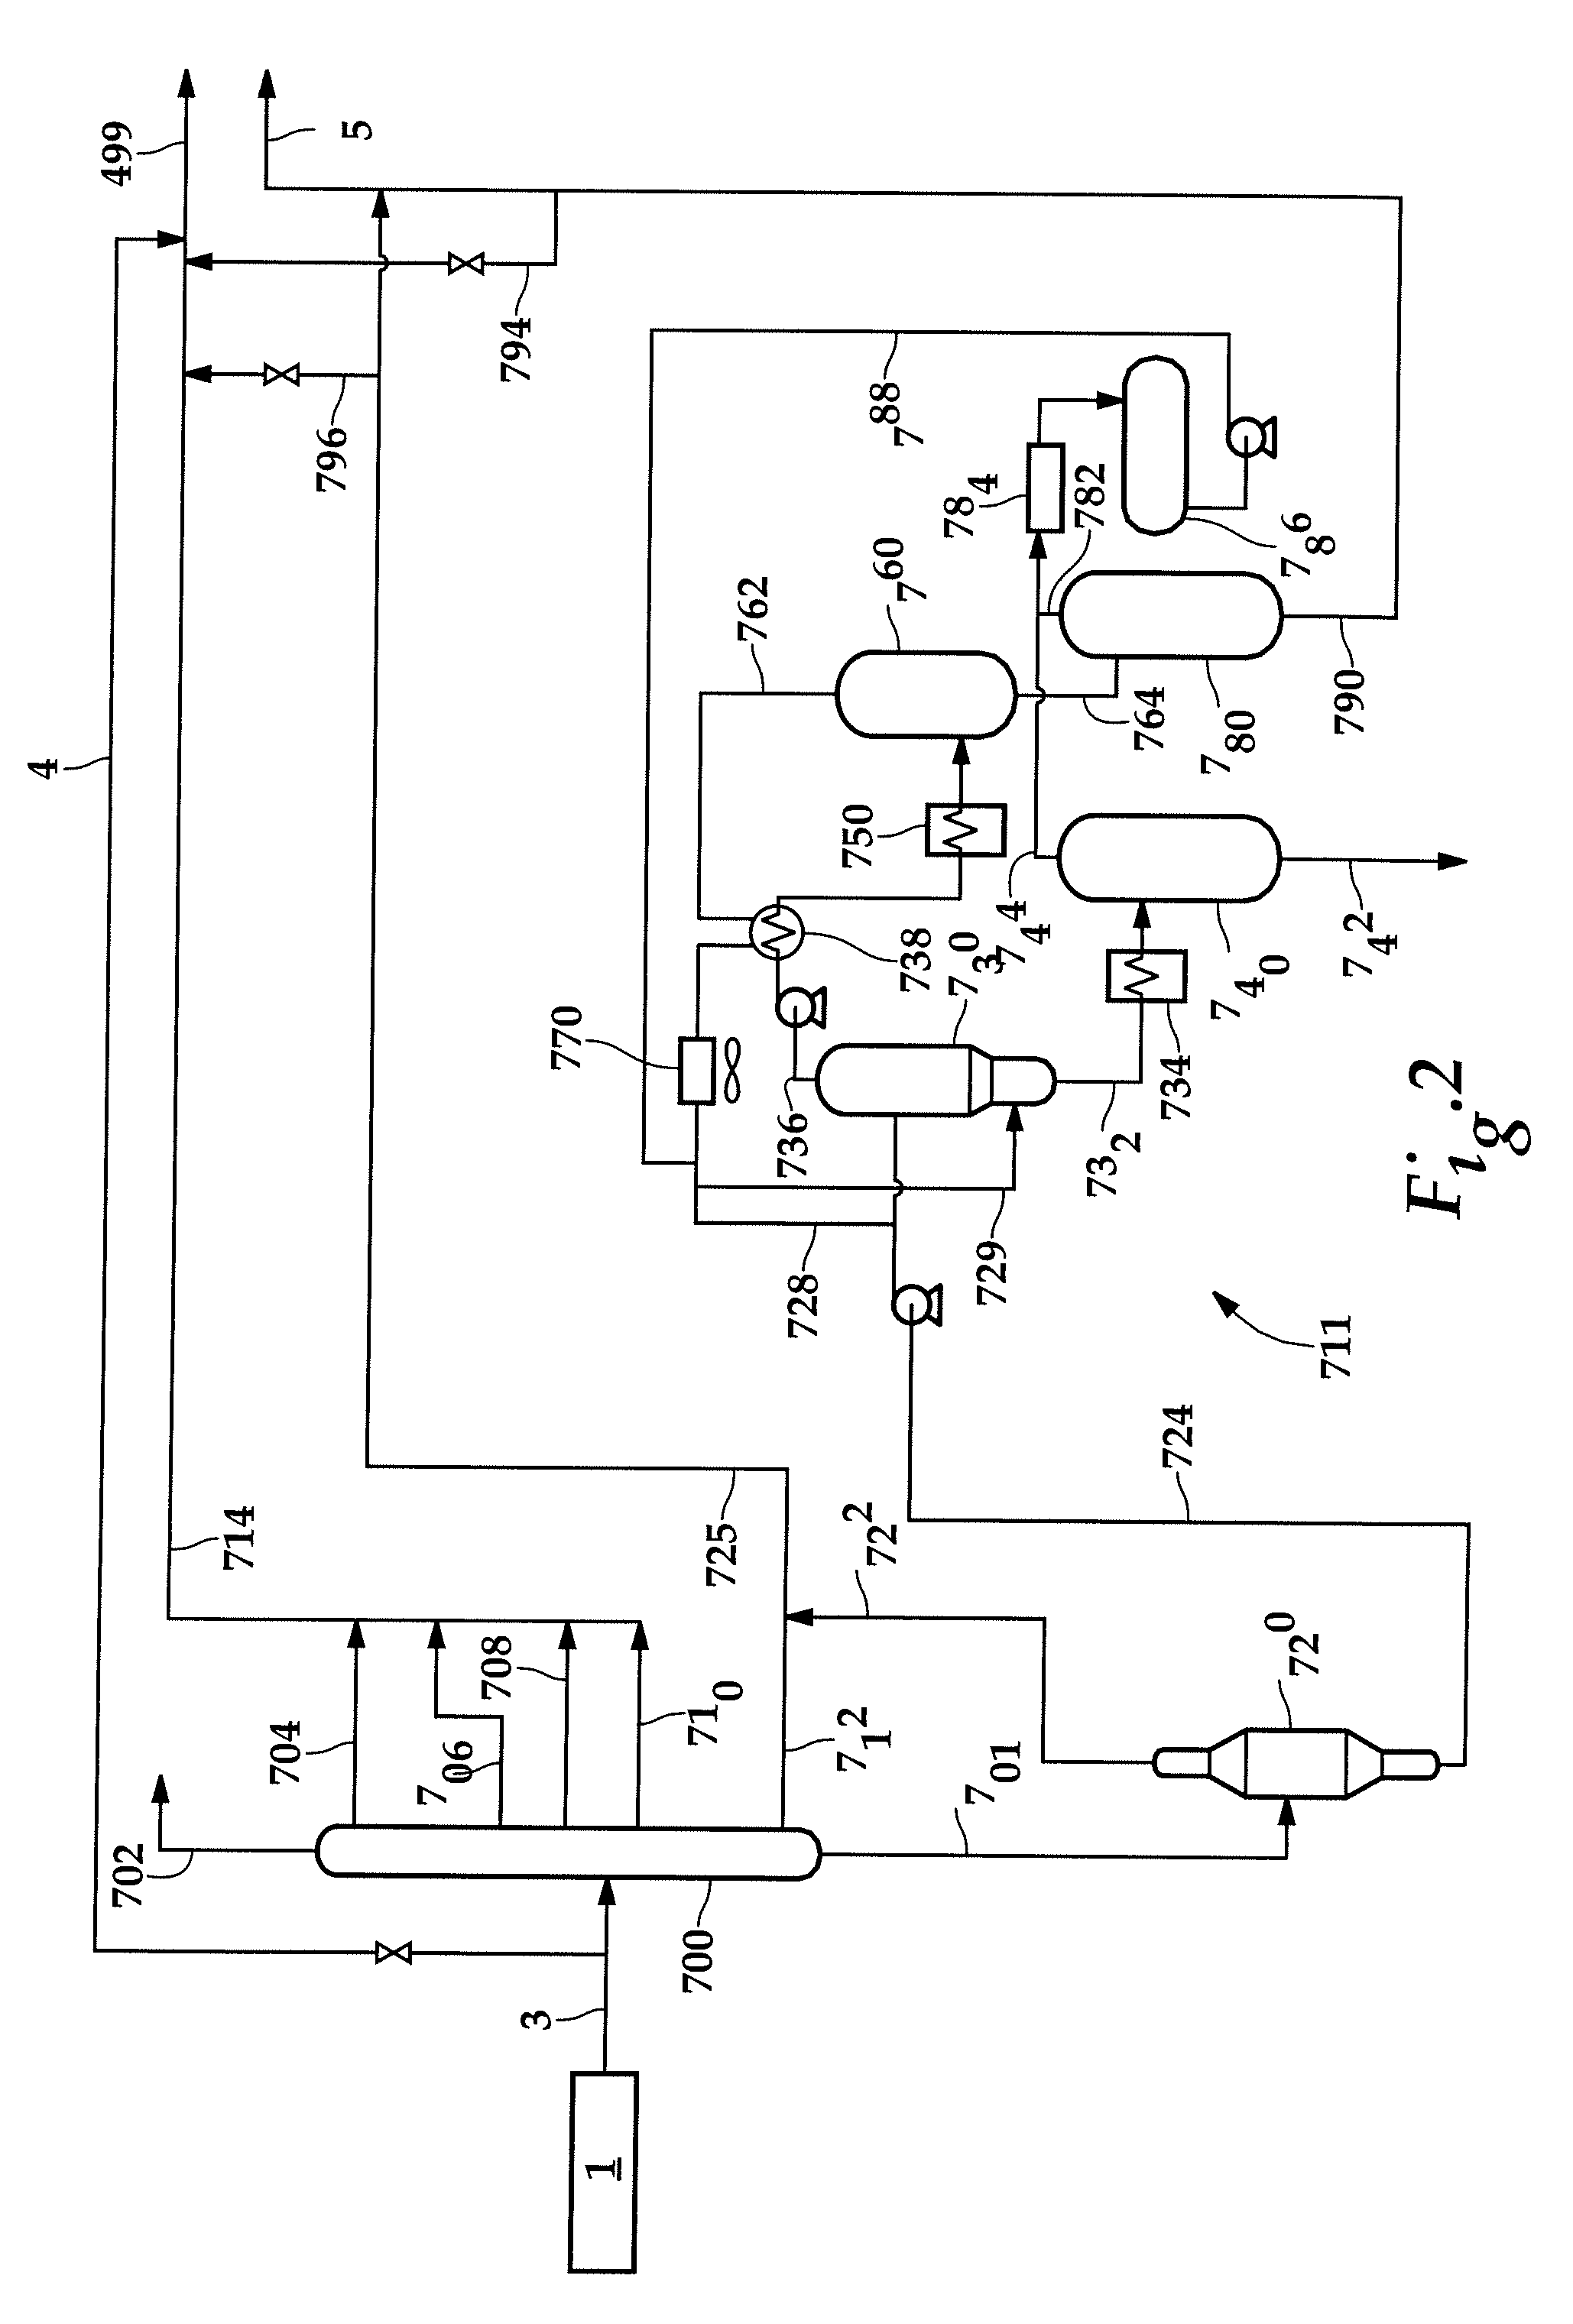 Process and apparatus for improving flow properties of crude petroleum